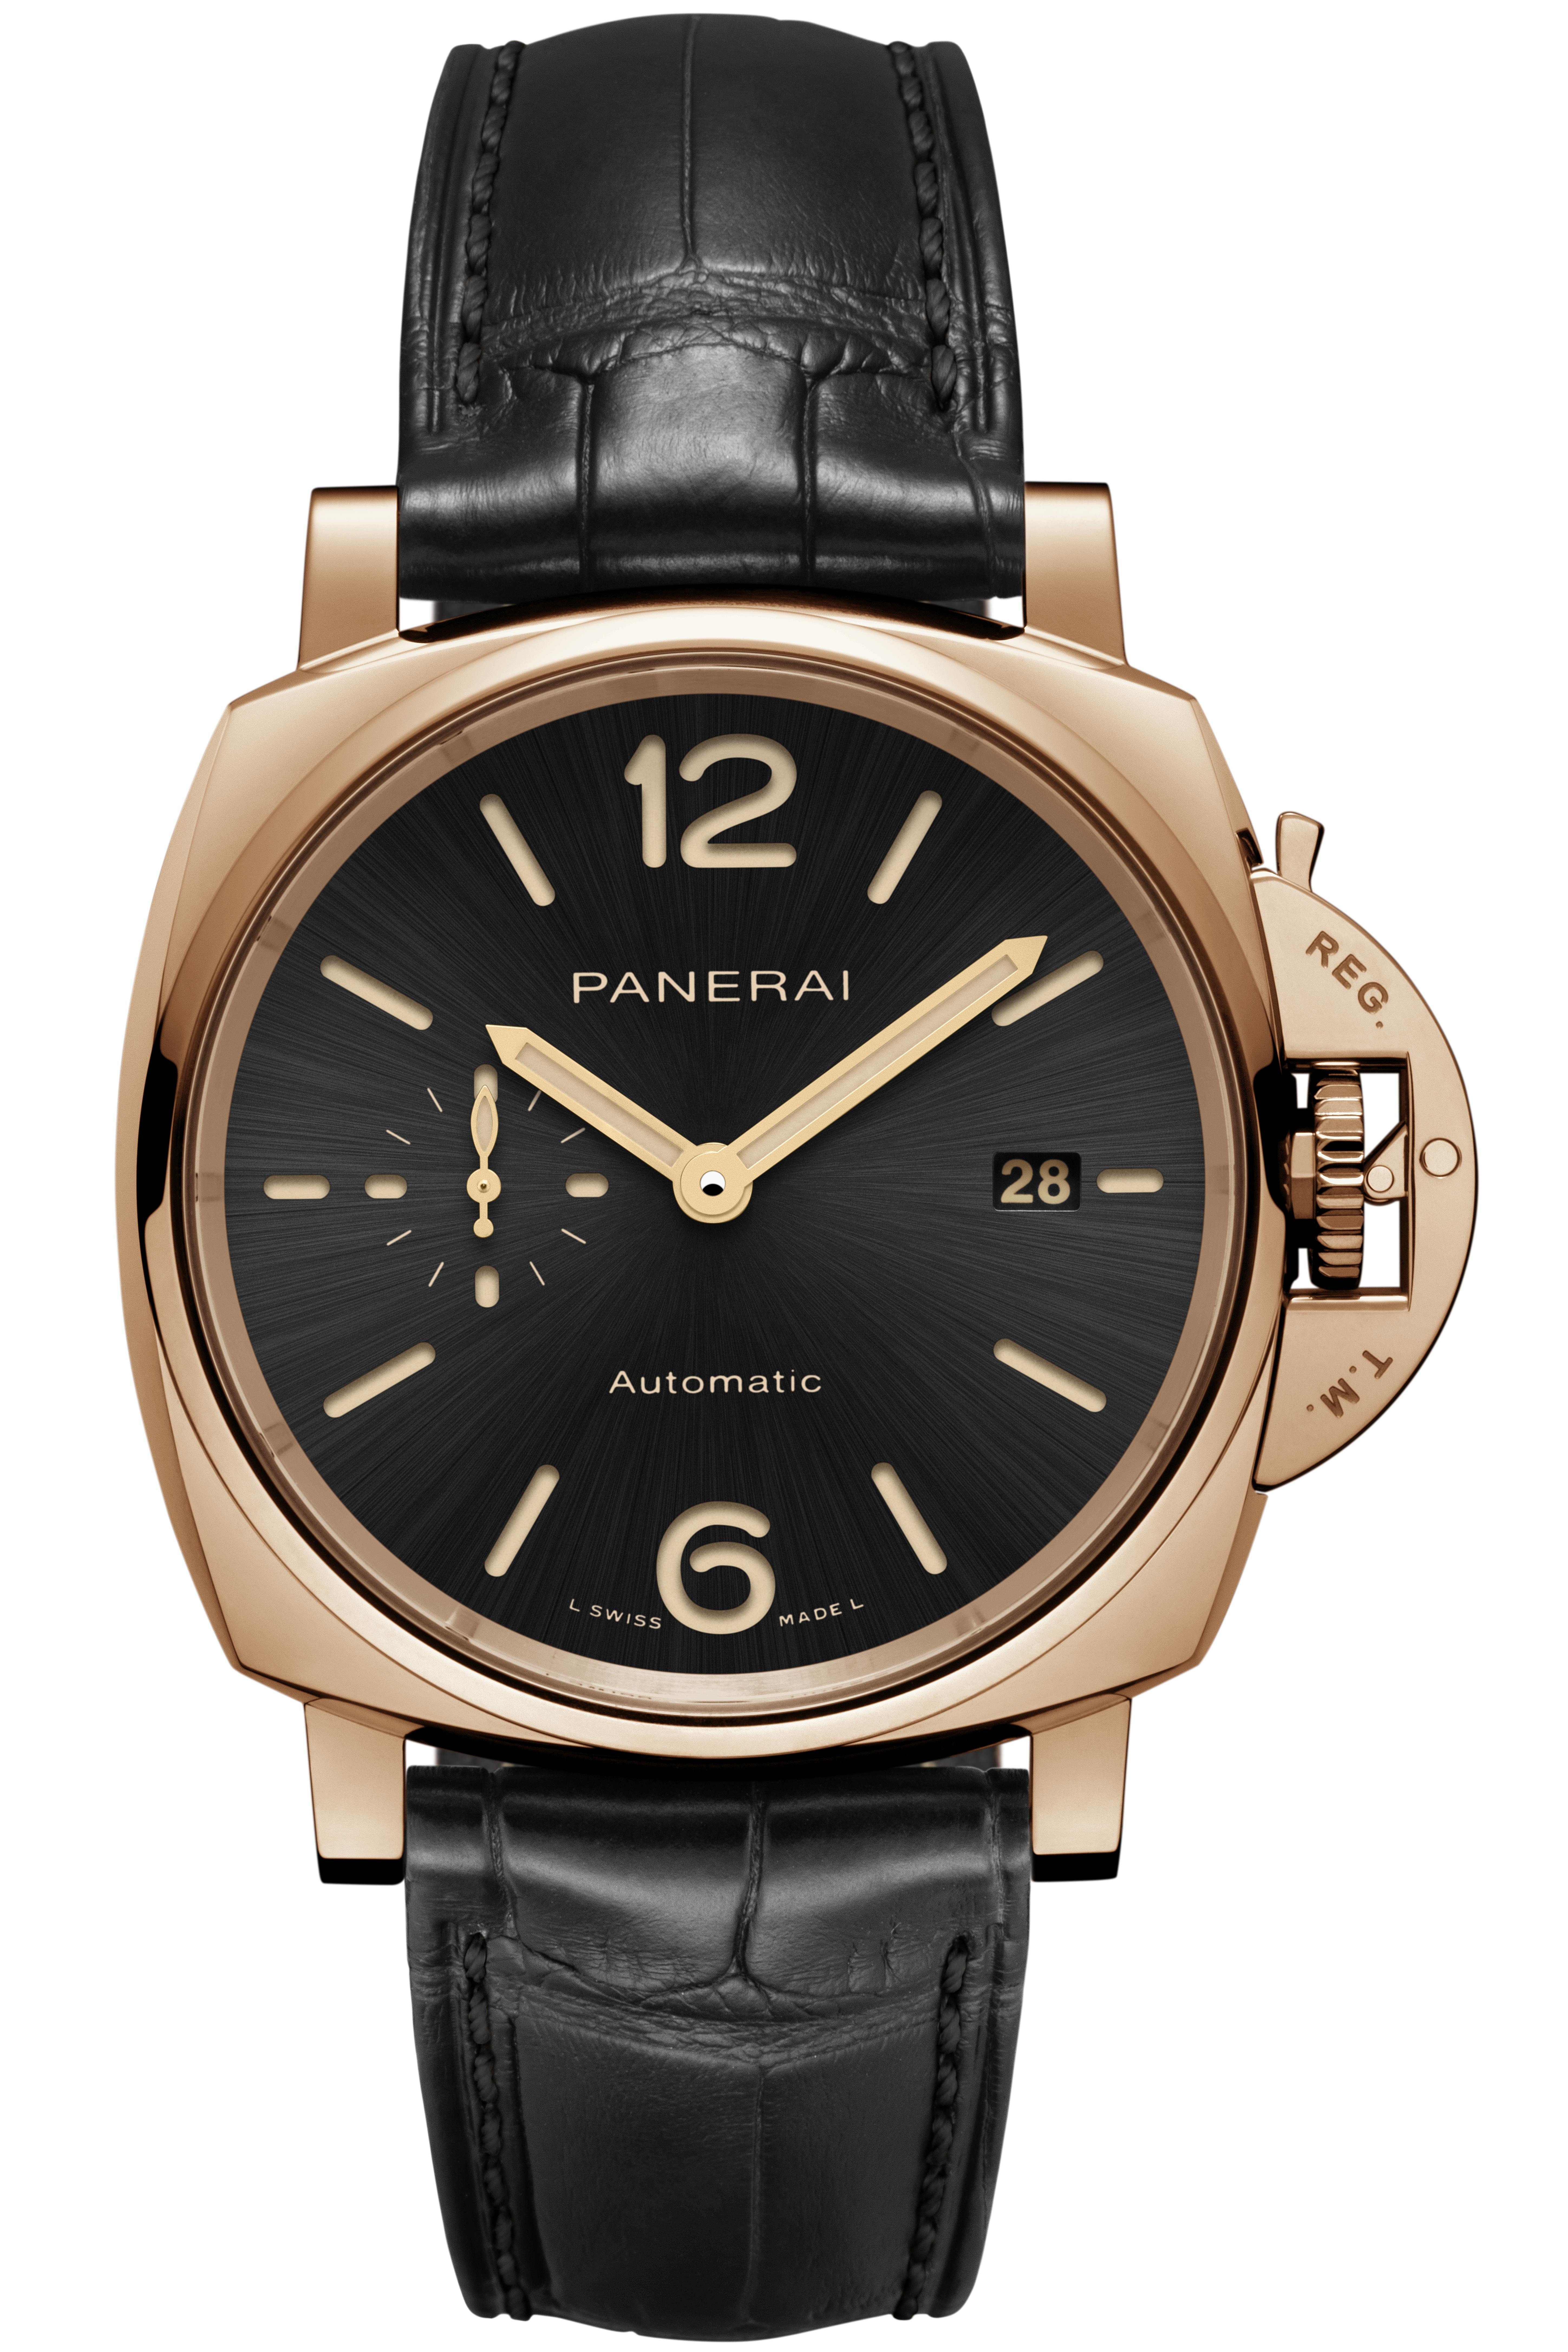 The Panerai Luminor Due Goldtech PAM01041 has a sandwich dial with cut-out numerals. Photo: Panerai